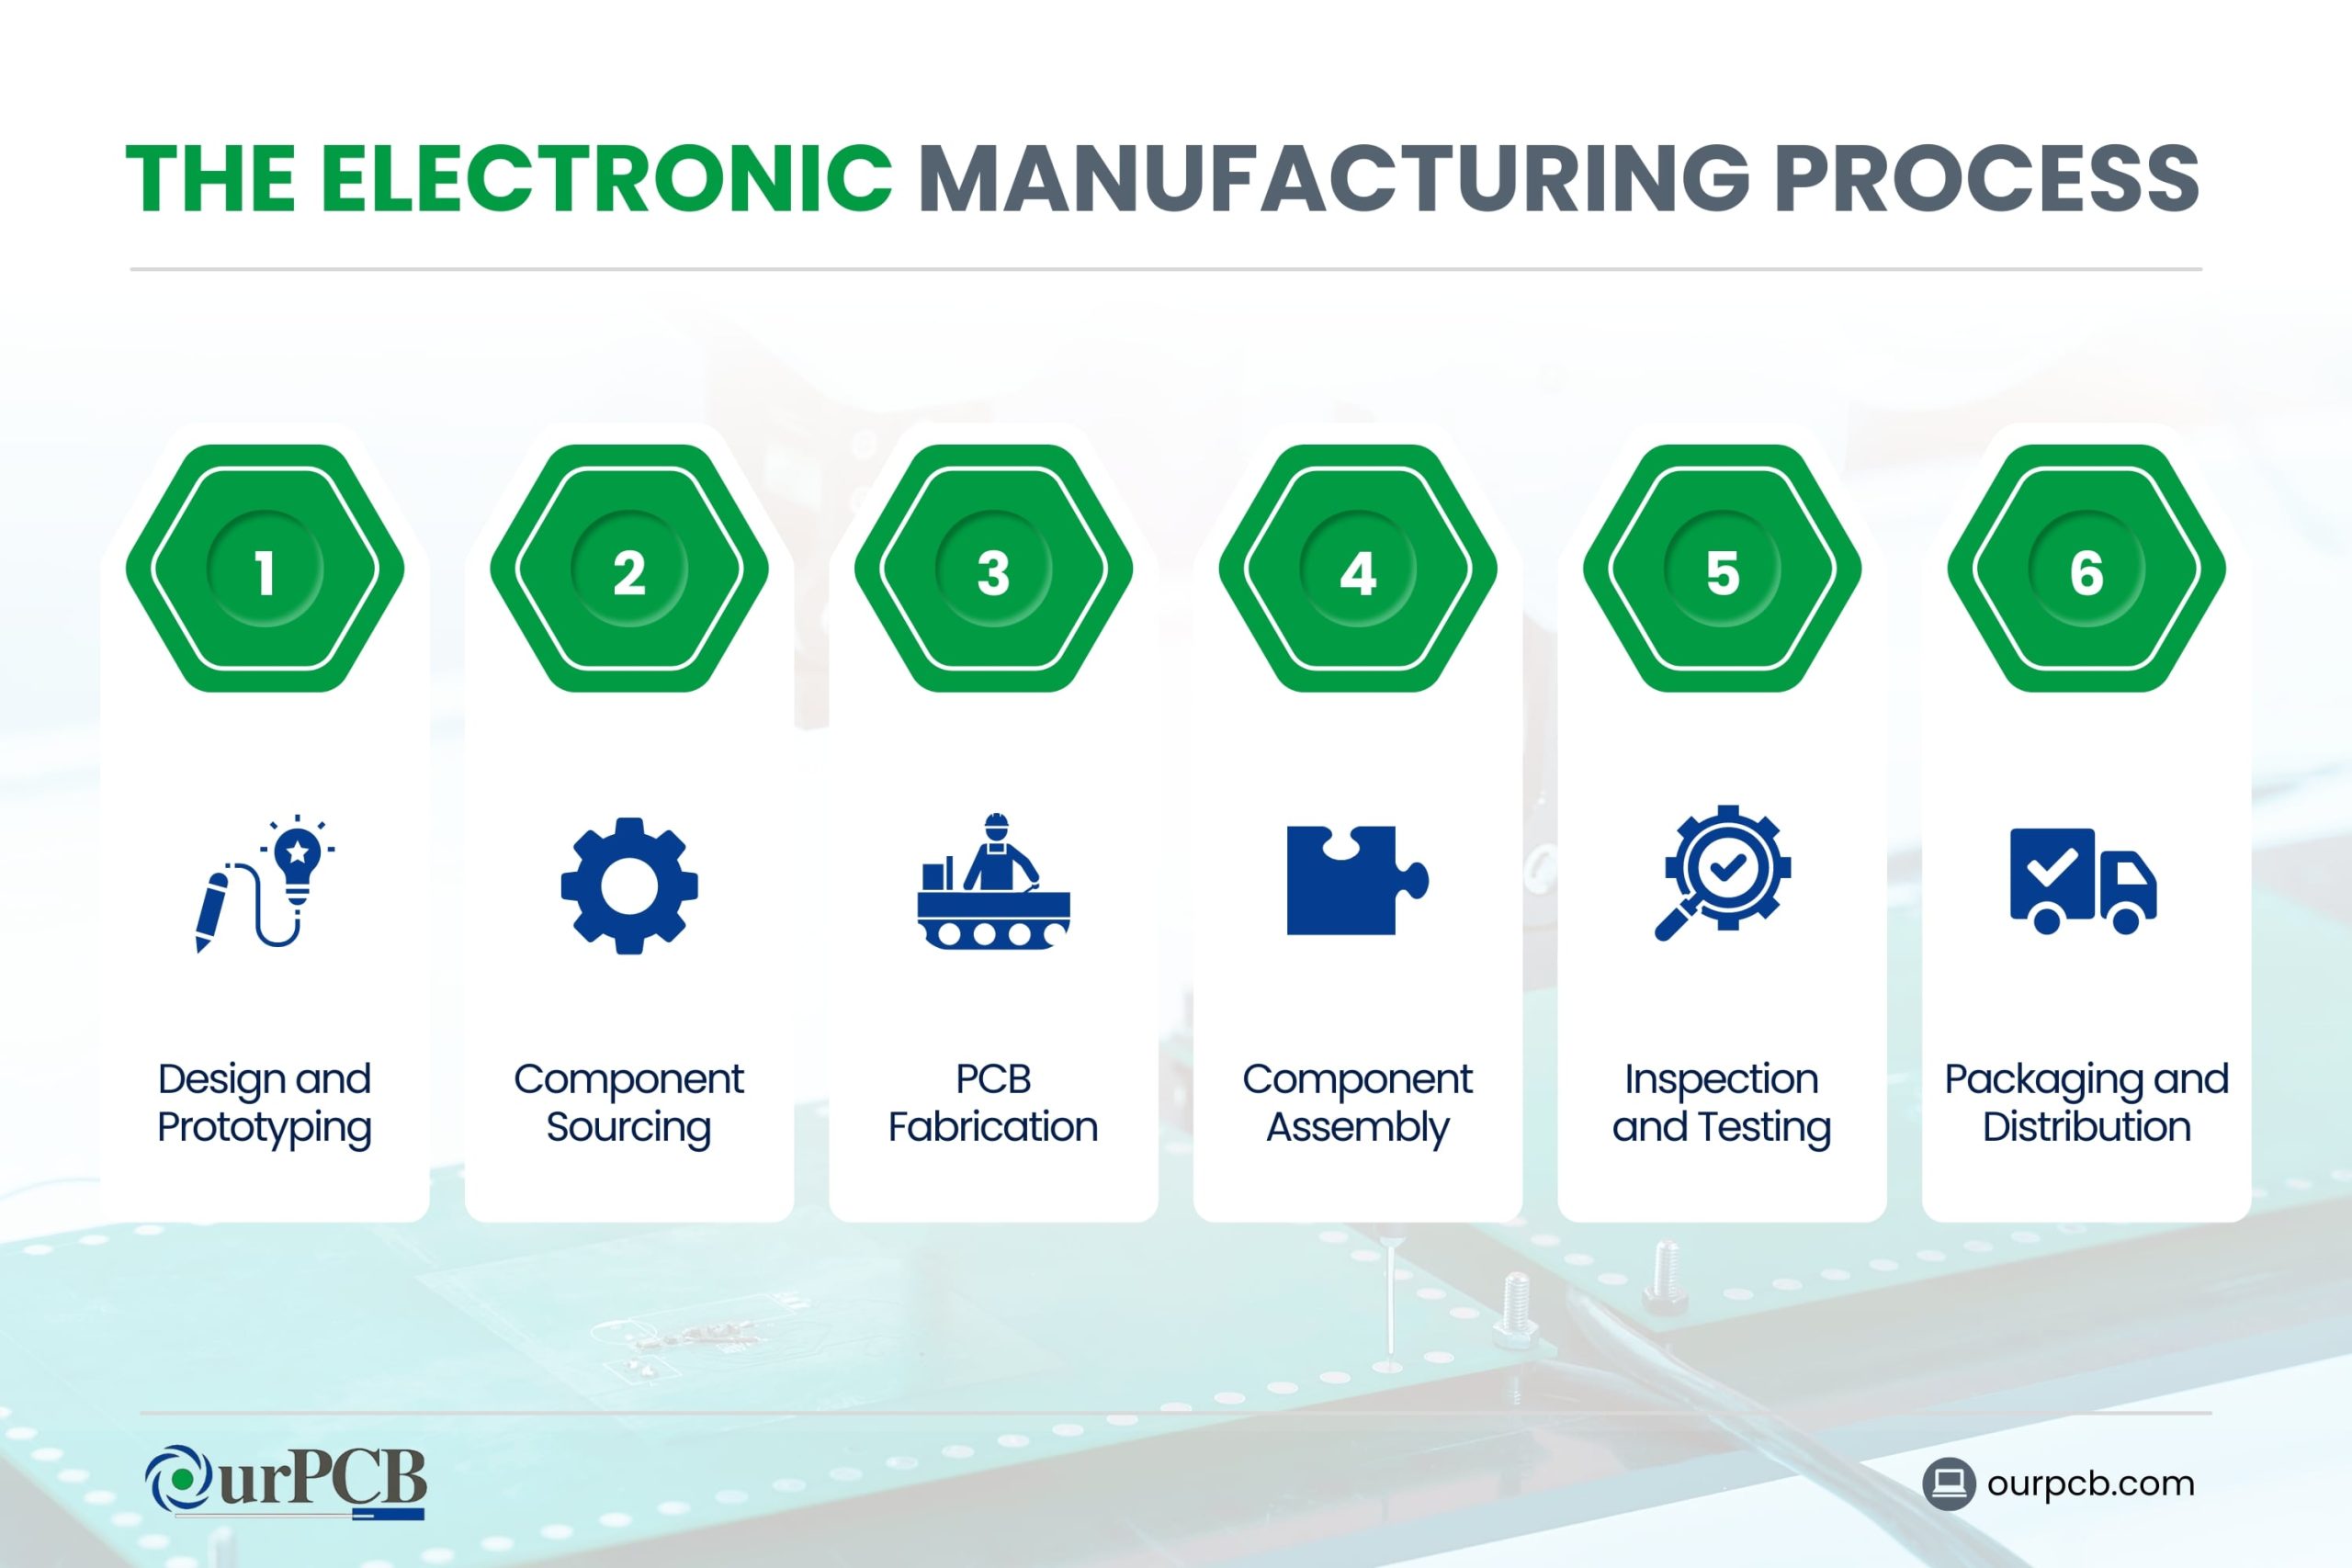 The Electronic Manufacturing Process